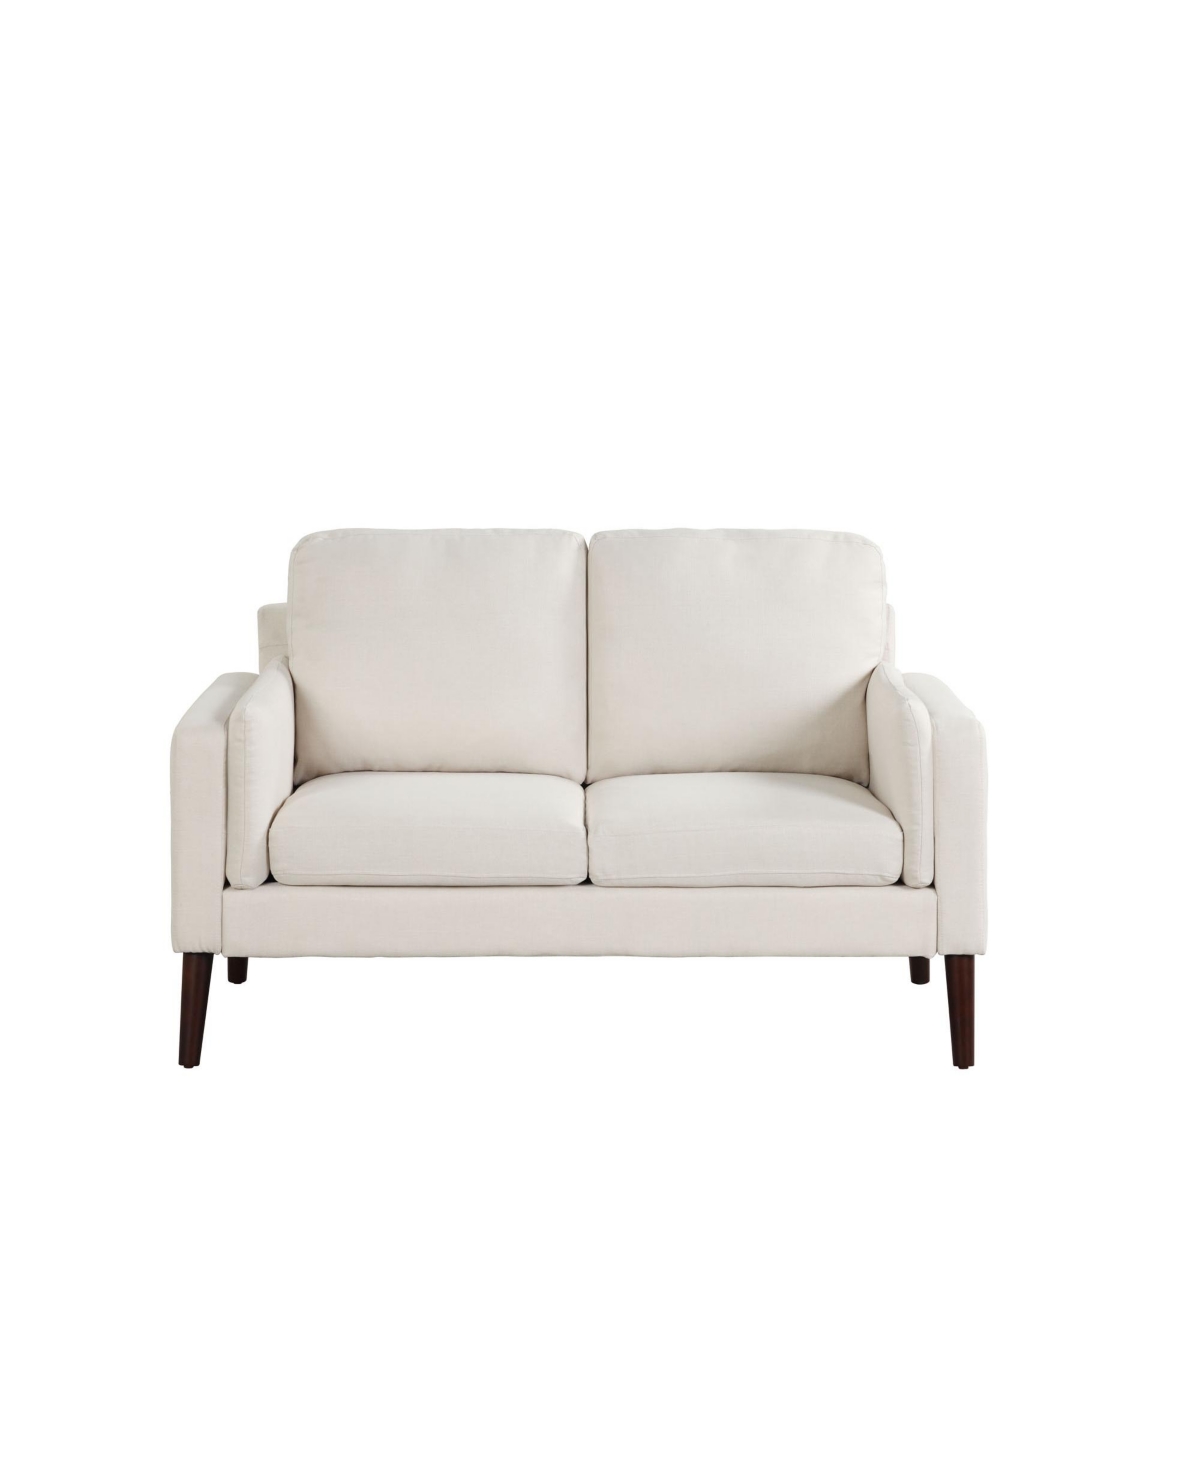 Lifestyle Solutions 35" Wood, Steel, Foam And Polyester Nate With Power And Usb Ports Loveseat In Cream